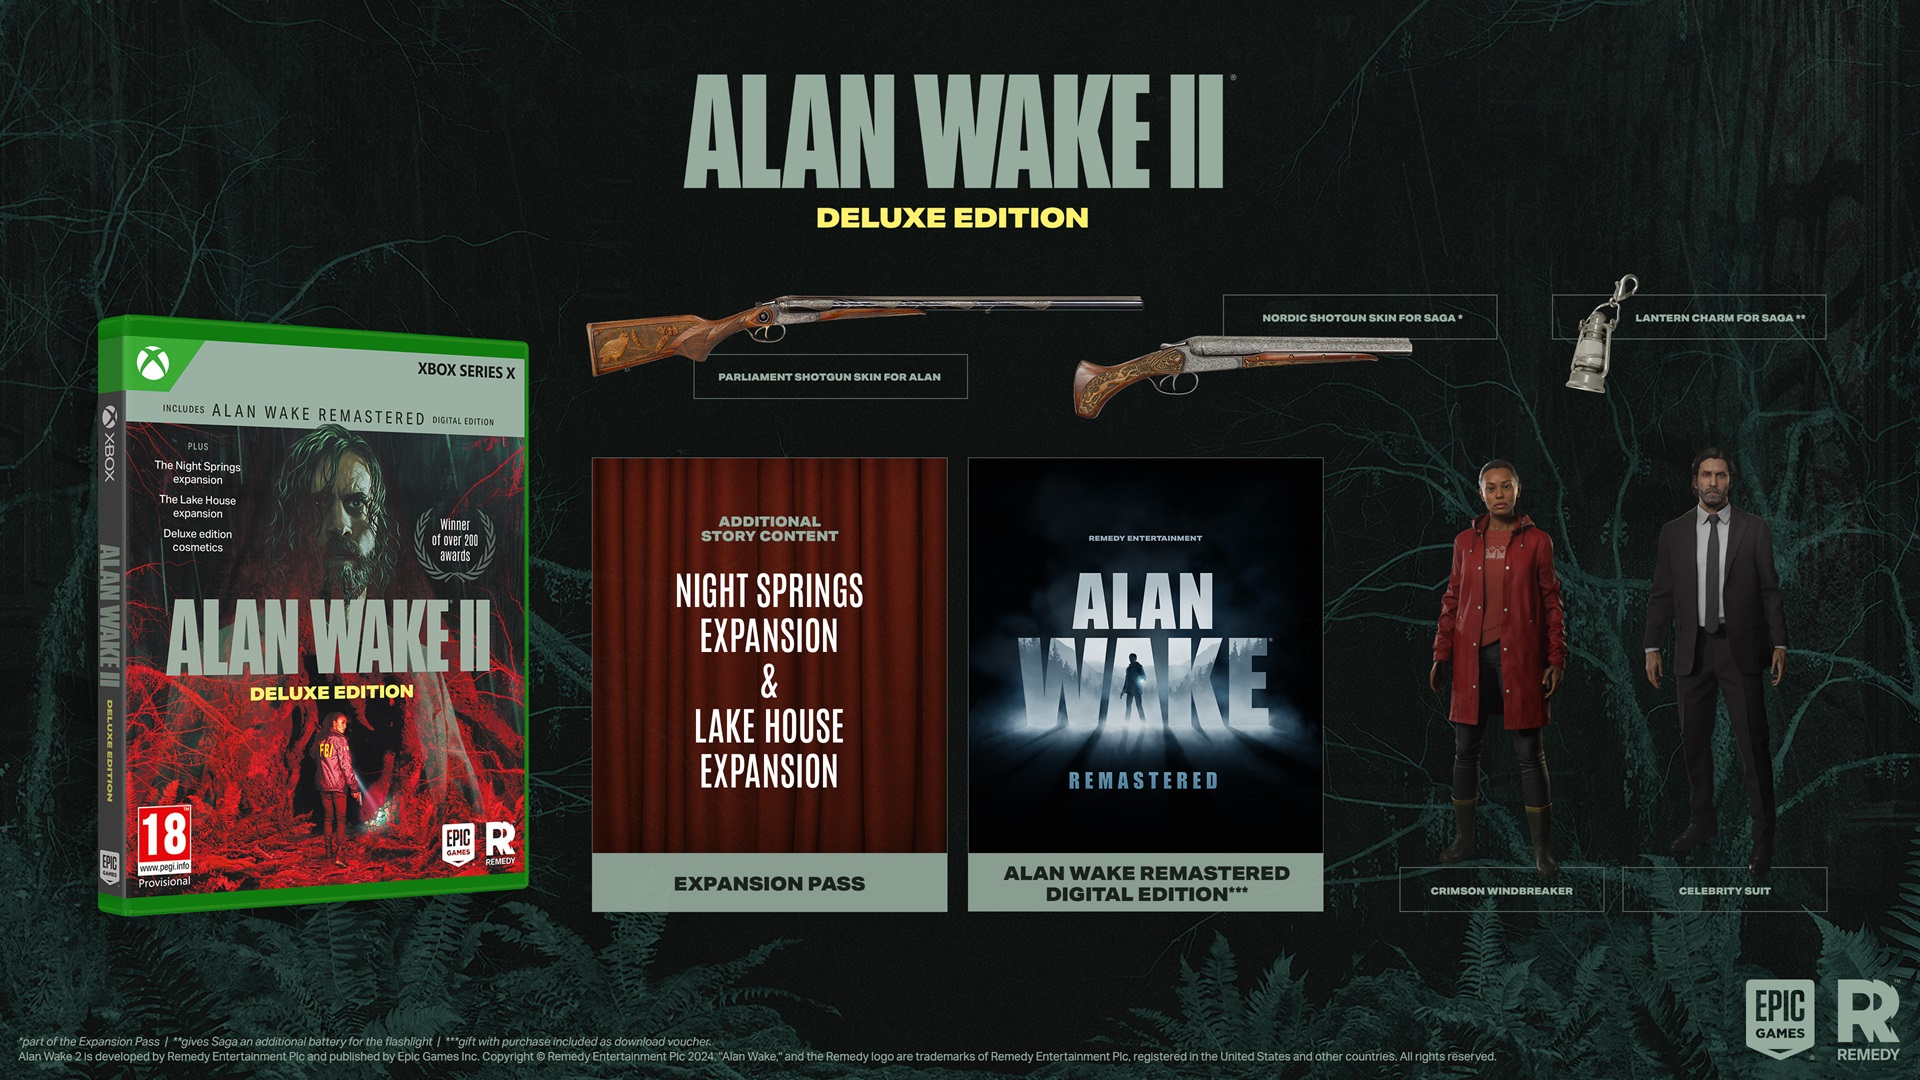  Alan Wake 2 - Deluxe Edition 